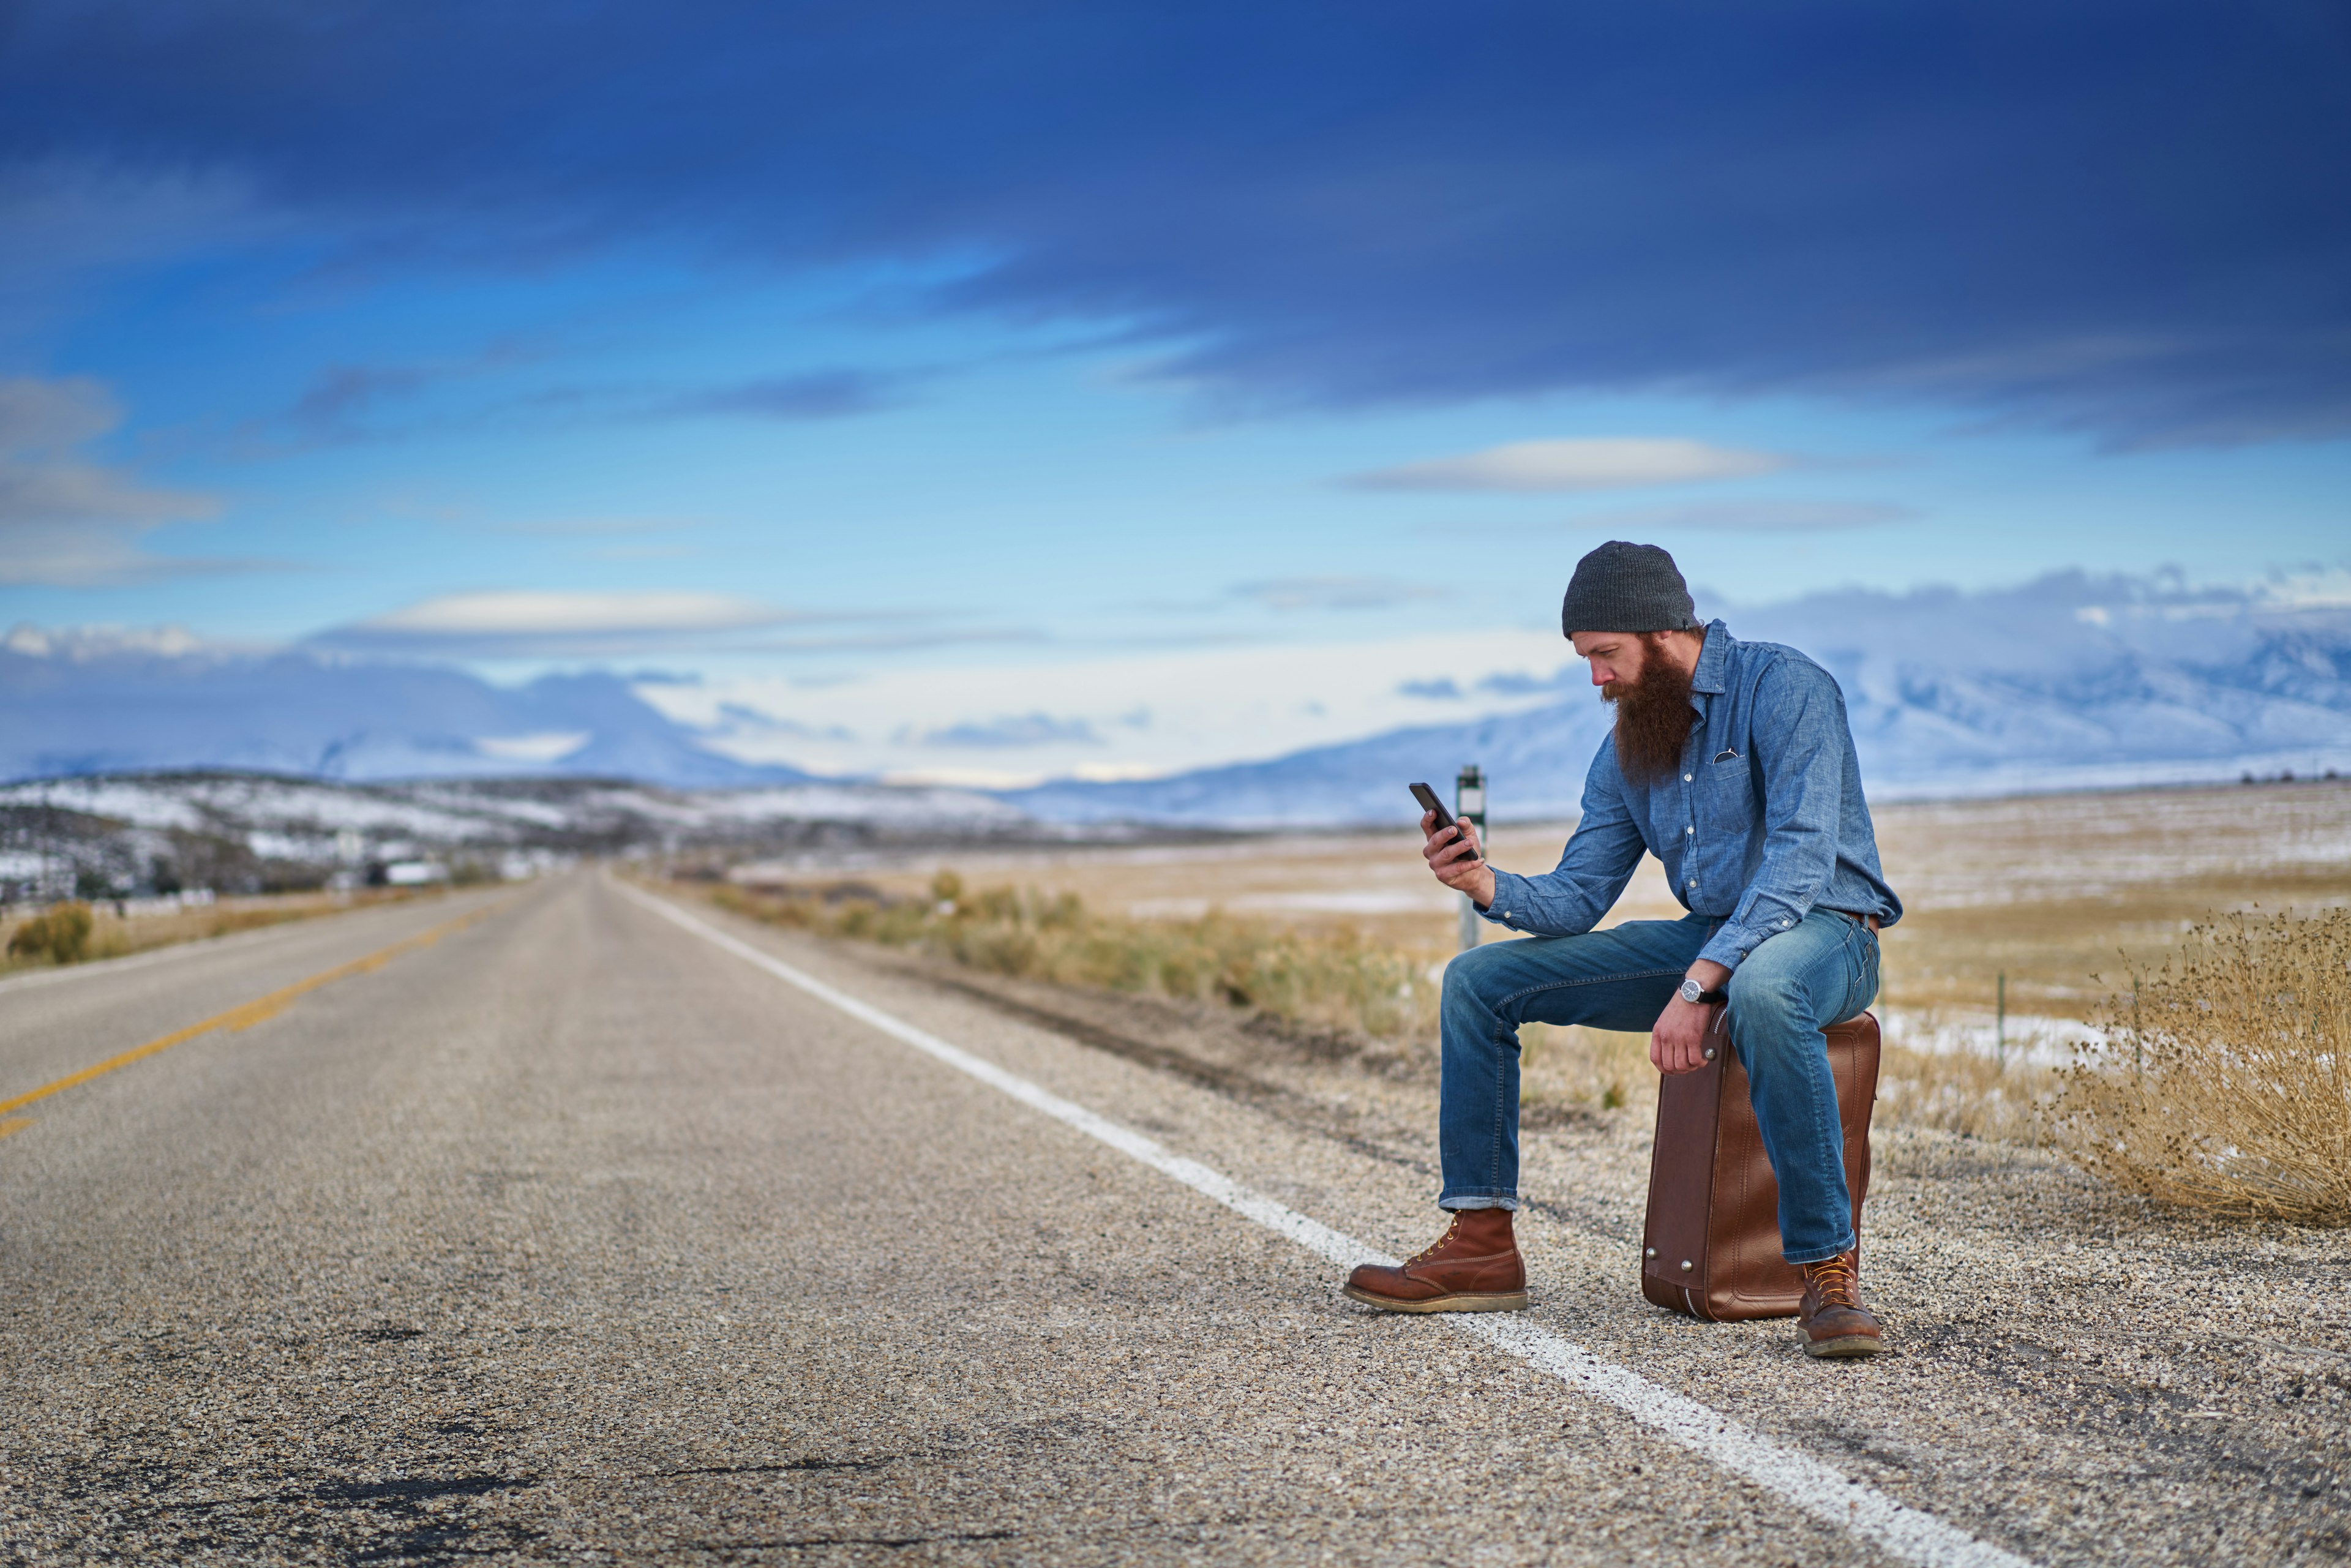 A bearded hitch hiker sitting on a suitcase and using a smart phone on the side of deserted road.